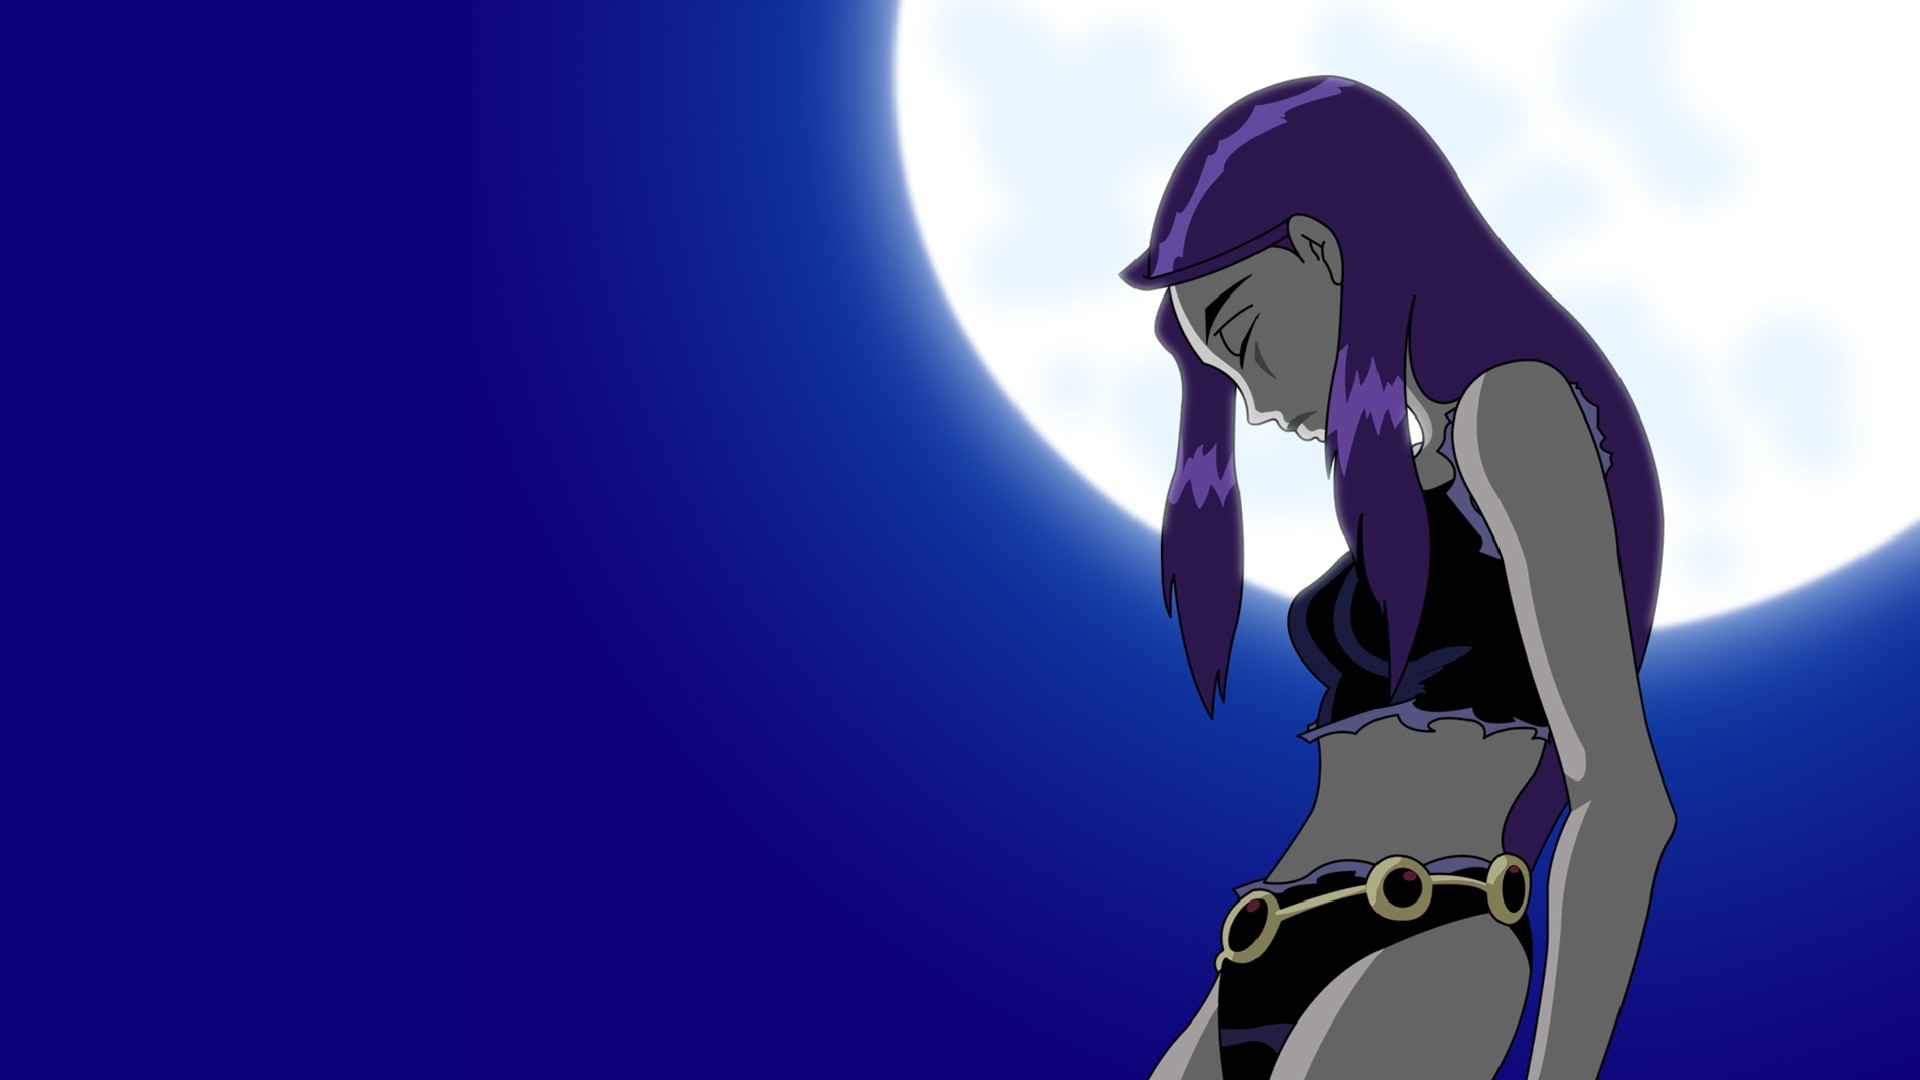 1920x1080 10 Teen Titans HD Wallpapers | Backgrounds - Wallpaper Abyss